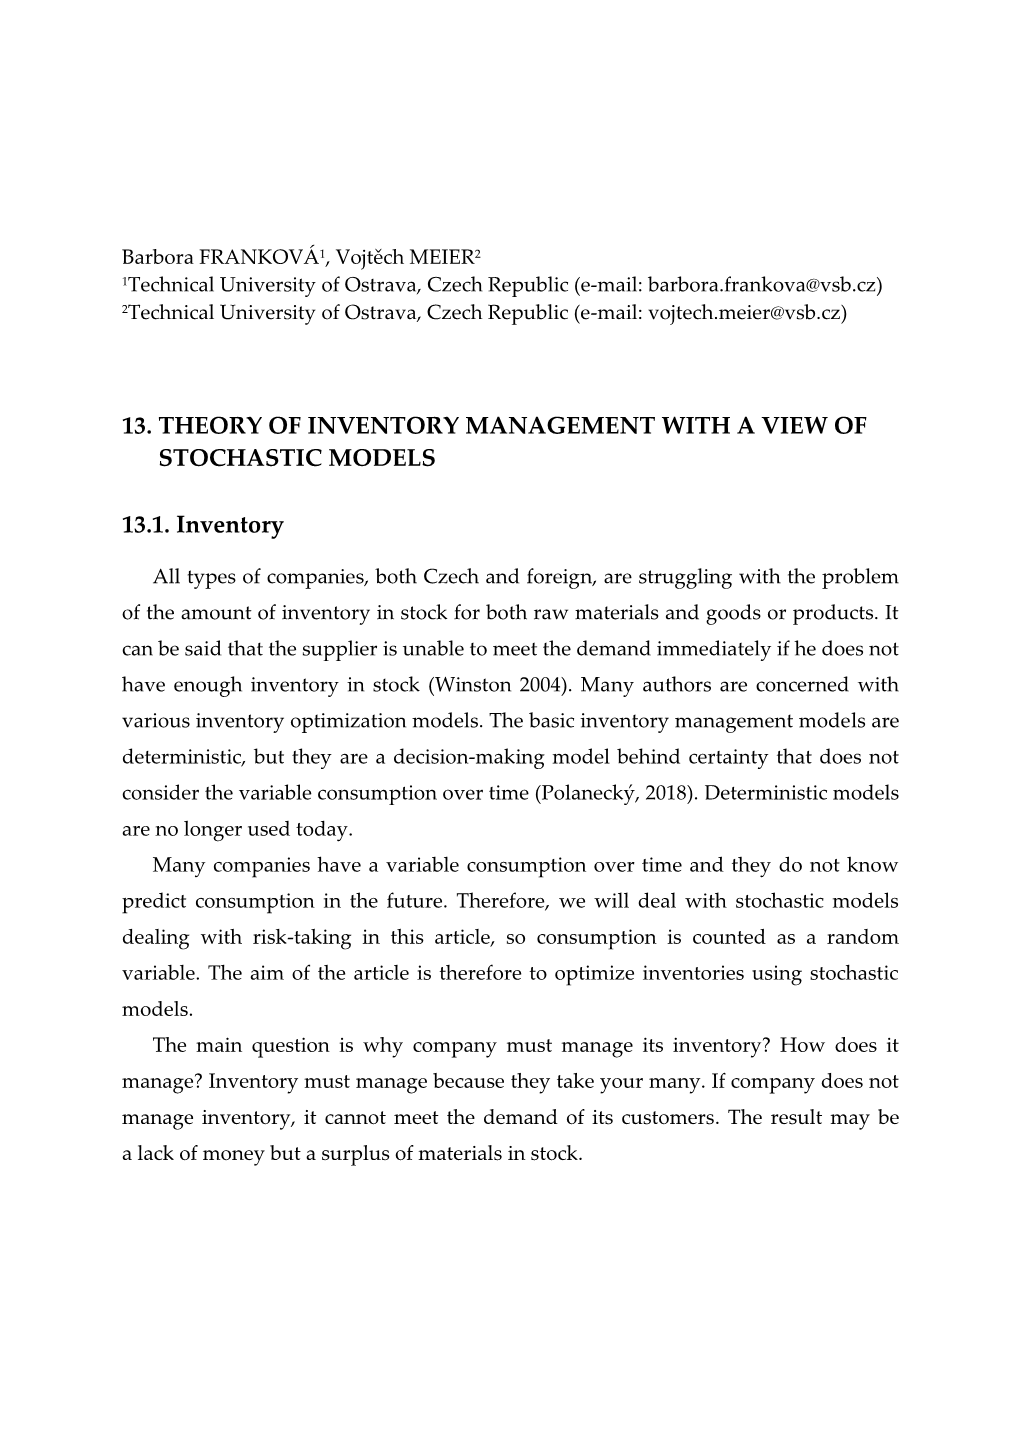 Theory of Inventory Management with a View of Stochastic Models